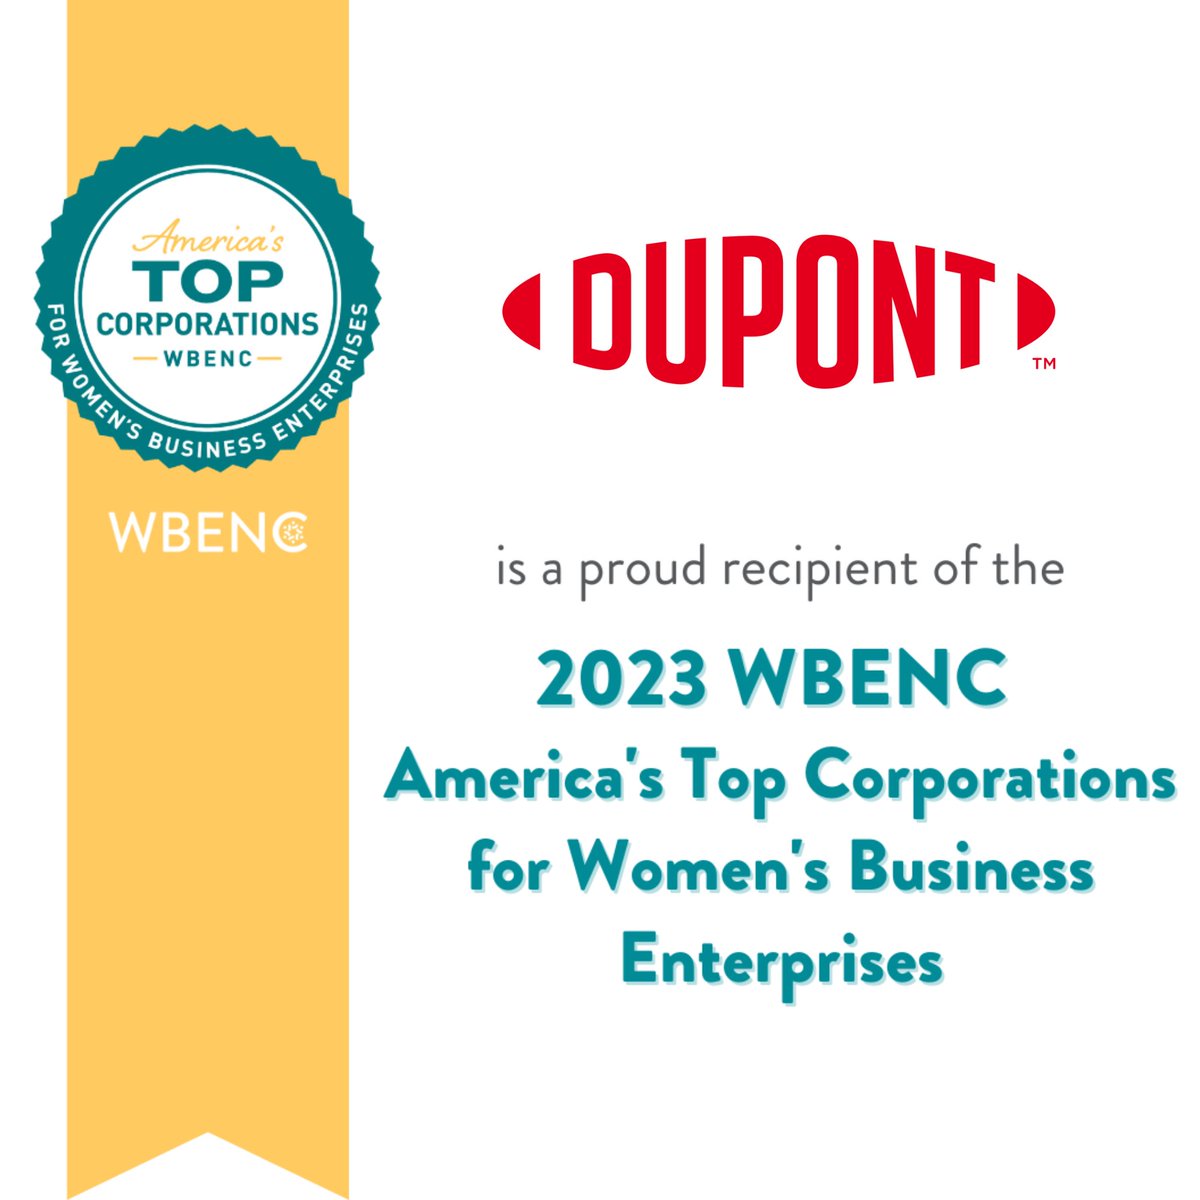 We’re proud to be among 2023 America’s Top Corporations for Women’s Business Enterprises by @WBENCLive. We thank our women-led suppliers who empower us to achieve equity in our supply chain & we'll continue to prioritize DE&I, growth, & innovation. dptn.ws/60143569n